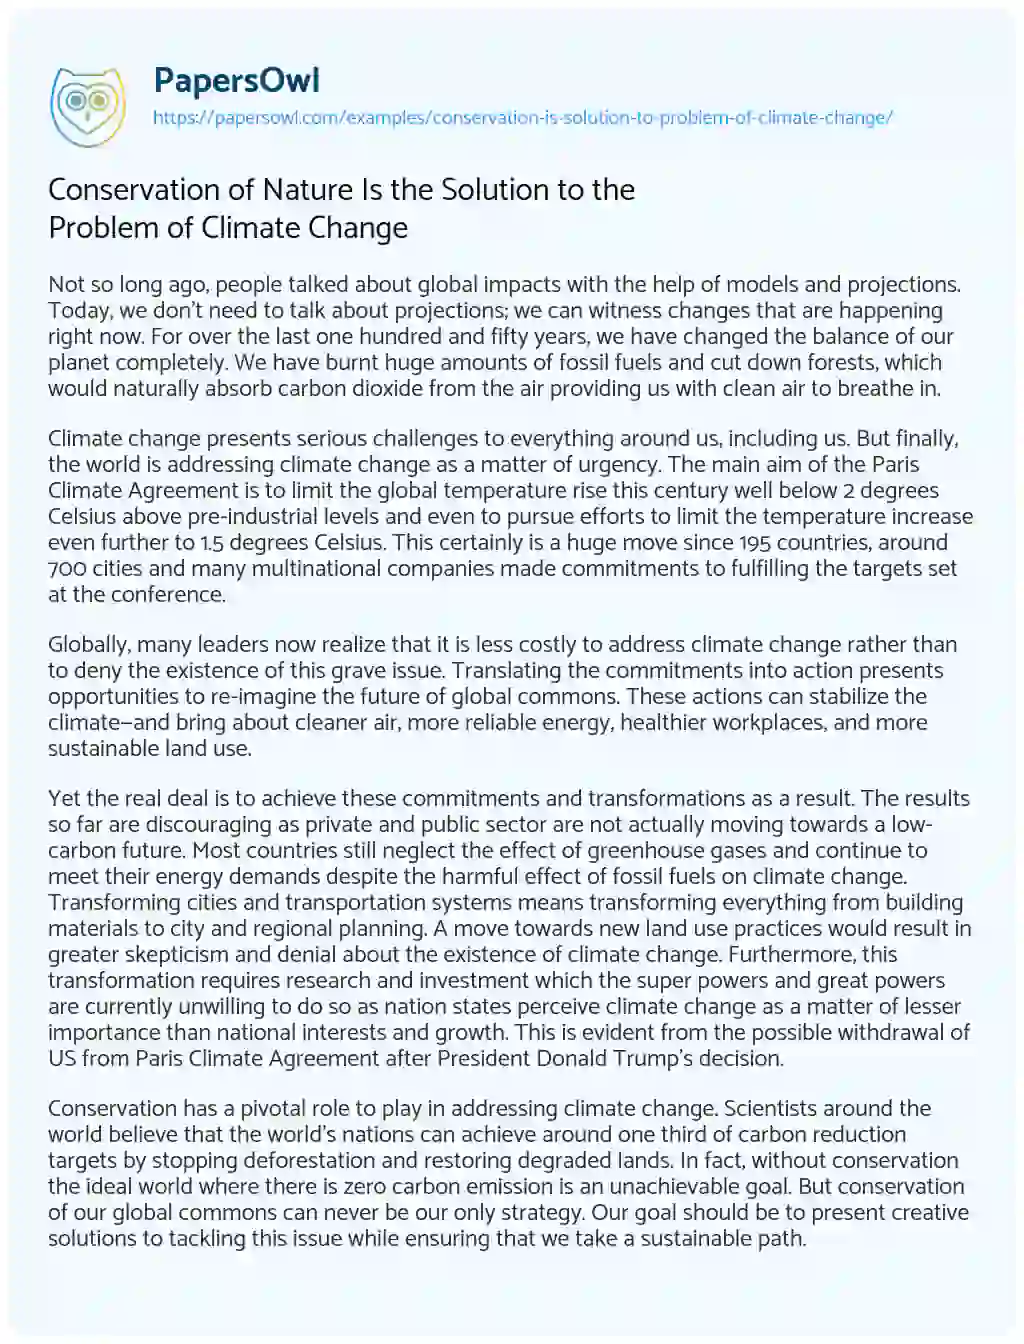 Essay on Conservation of Nature is the Solution to the Problem of Climate Change